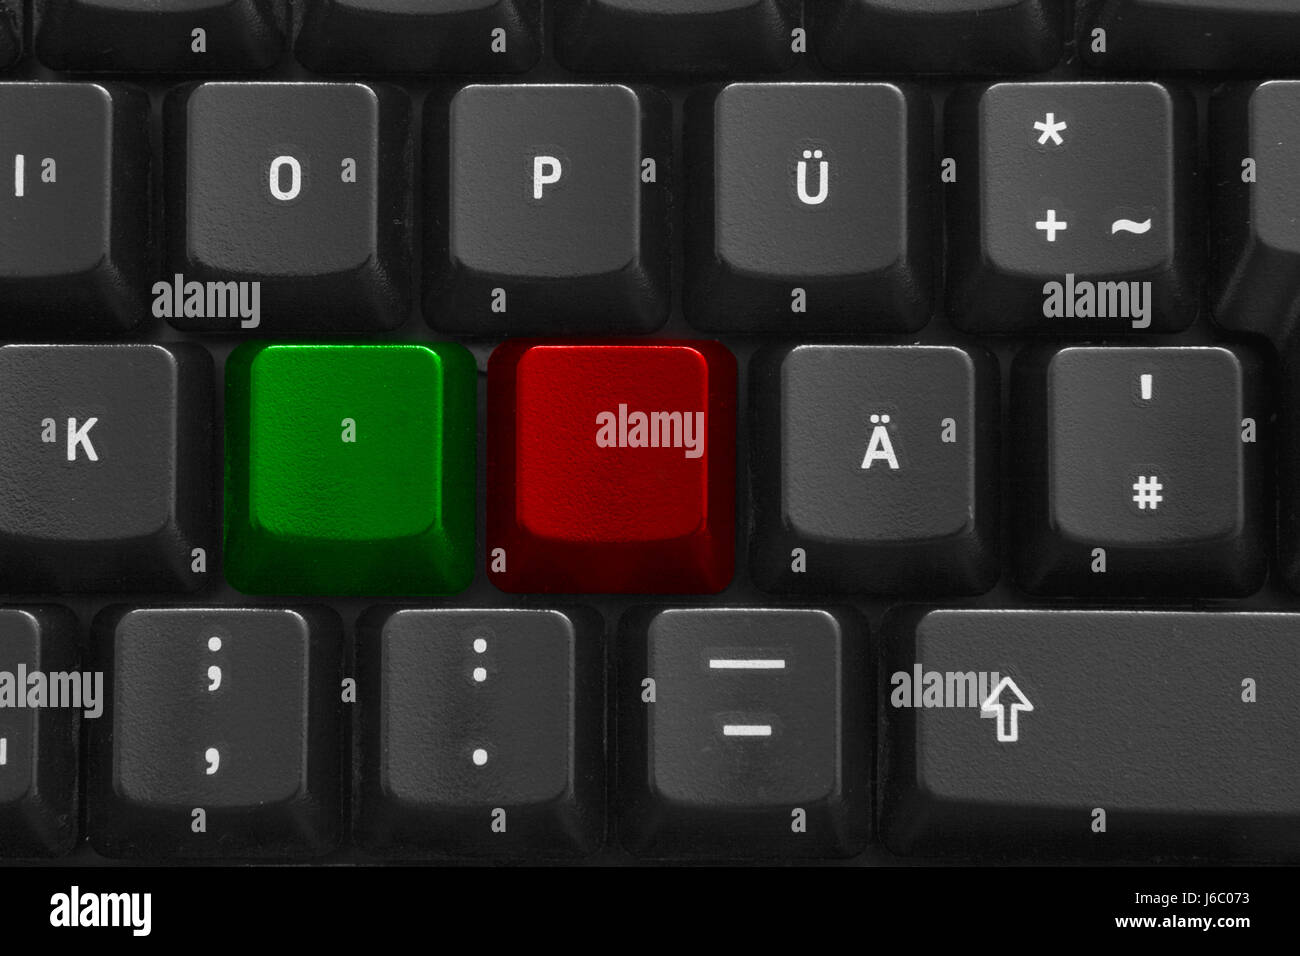 keyboard green letters red PC computers computer closeup black swarthy jetblack Stock Photo